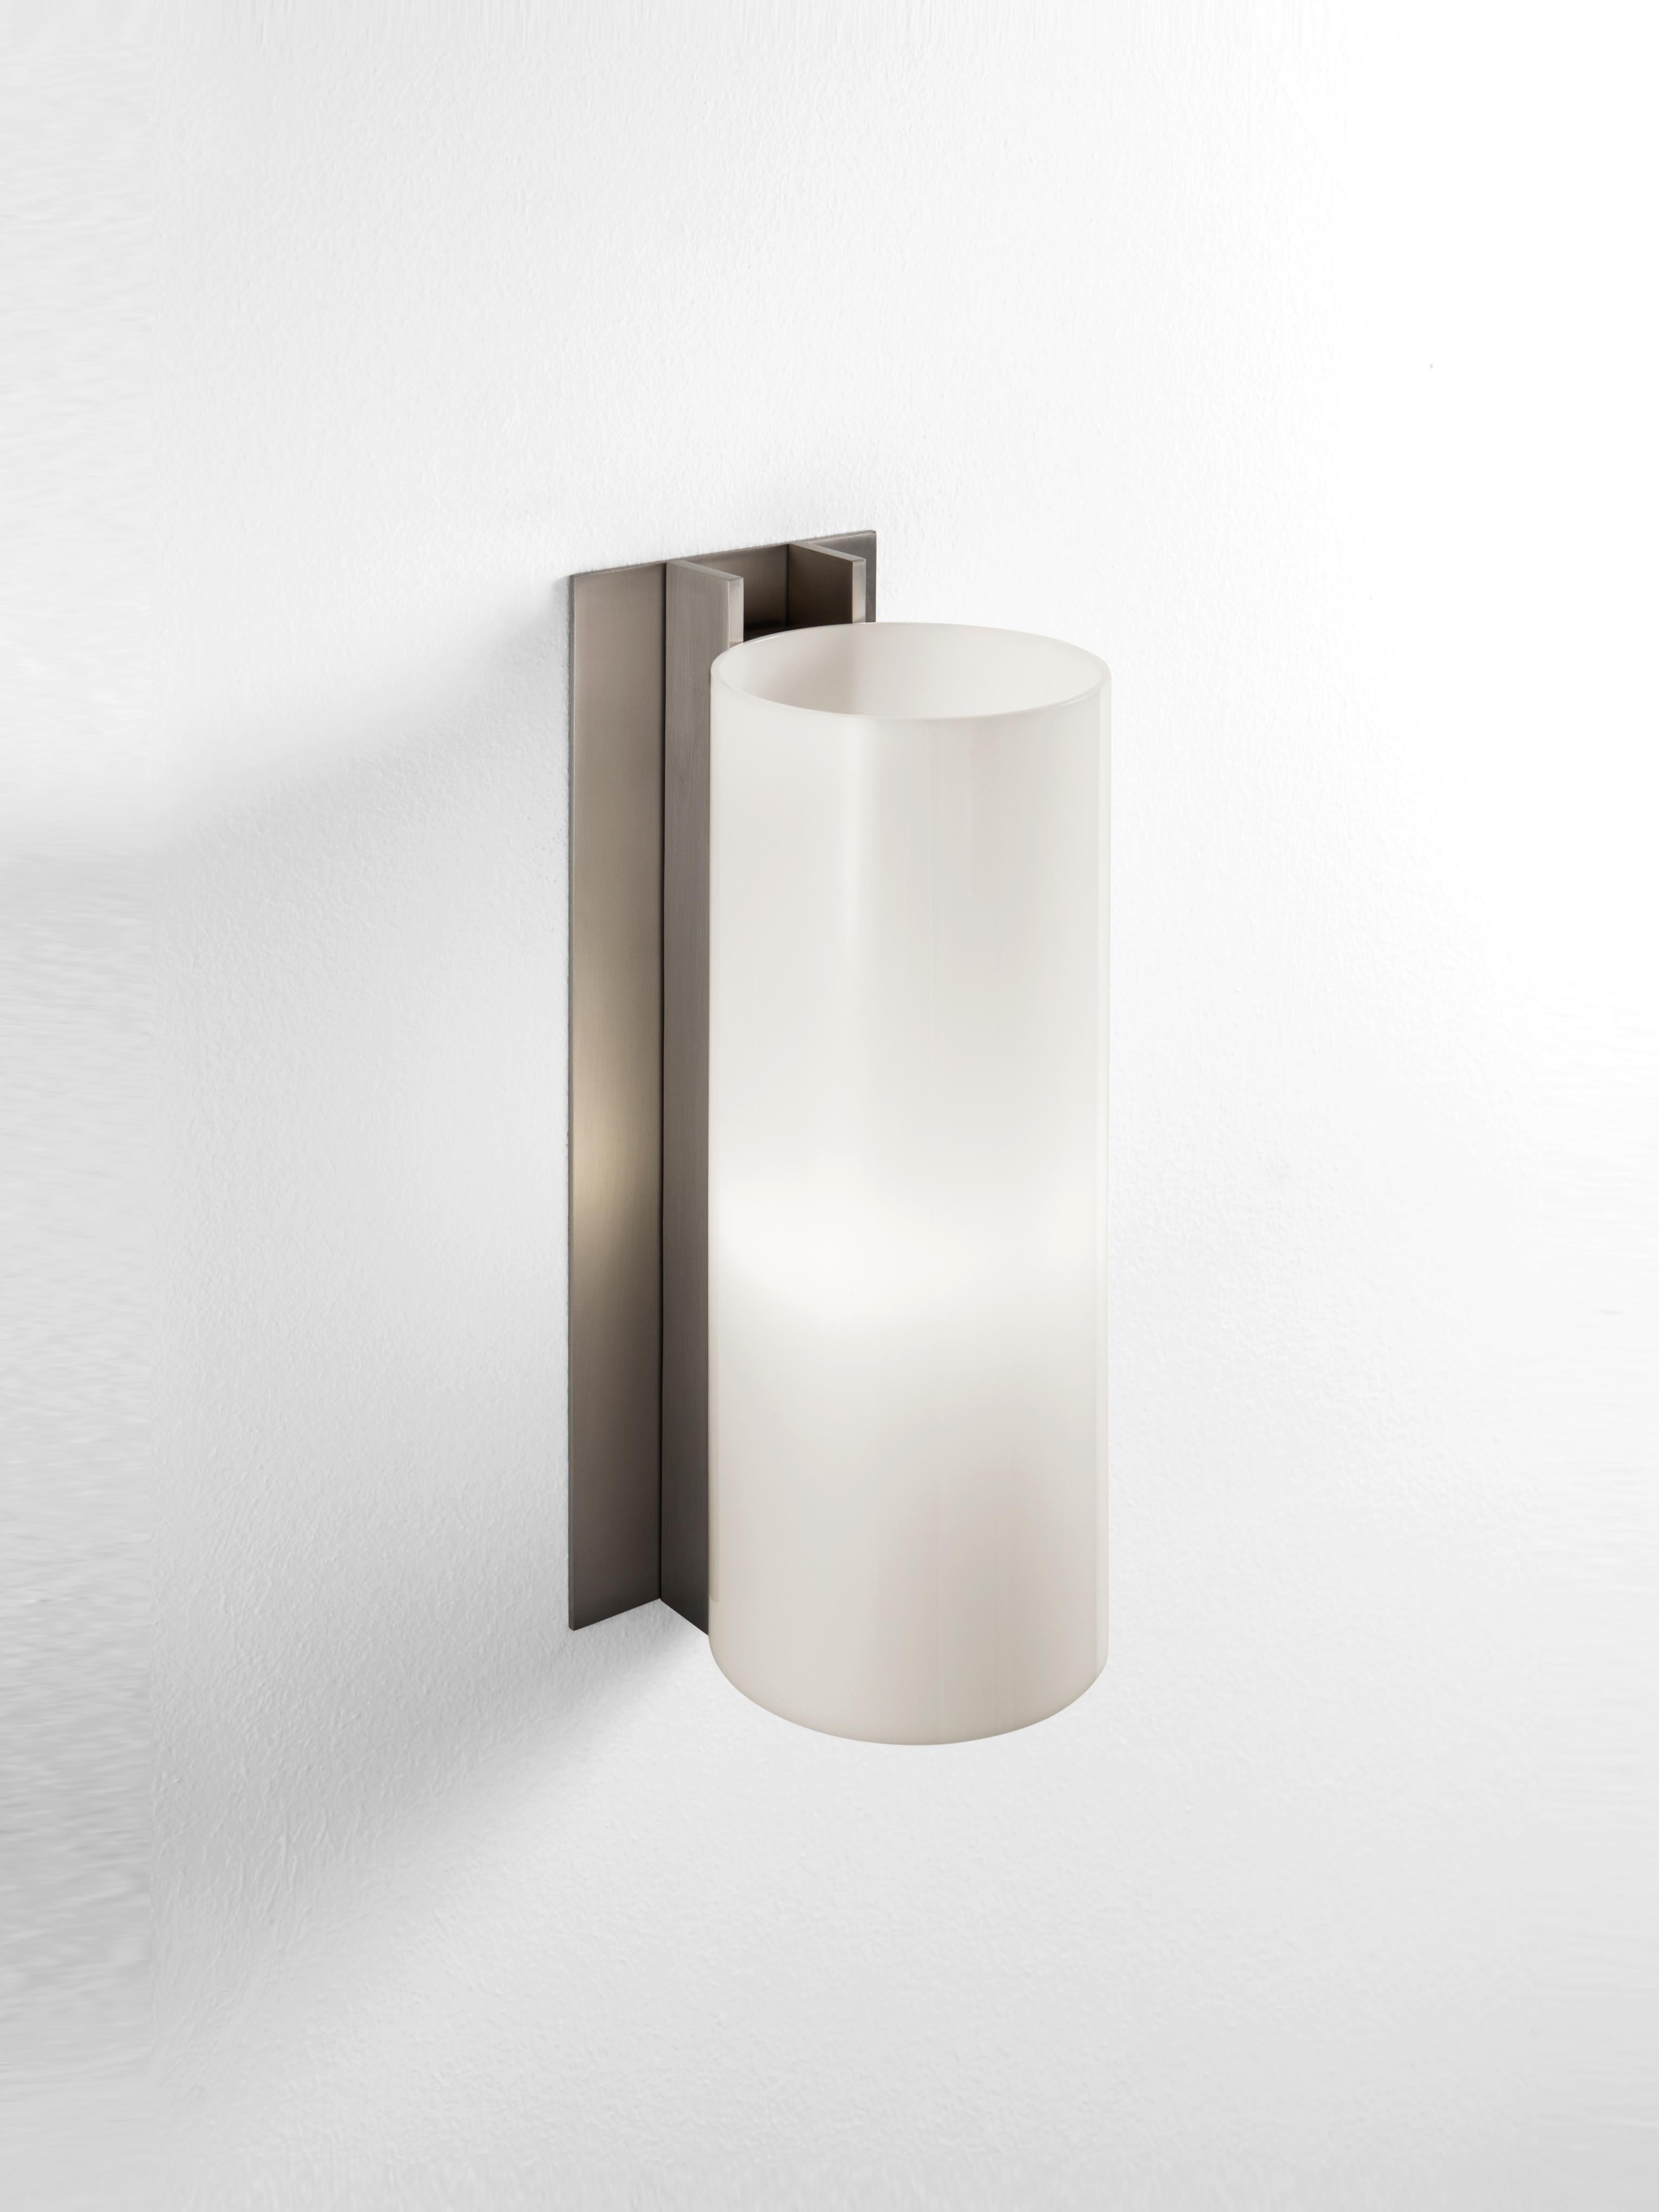 TMM Metálico wall lamp by Miguel Milá
Dimensions: D 12 x W 15 x H 34 cm
Materials: Metal, white methacrylate shade.

In an exquisite show of intelligence and good taste, this representative of the adjustable TM series (TM stands for “tramo